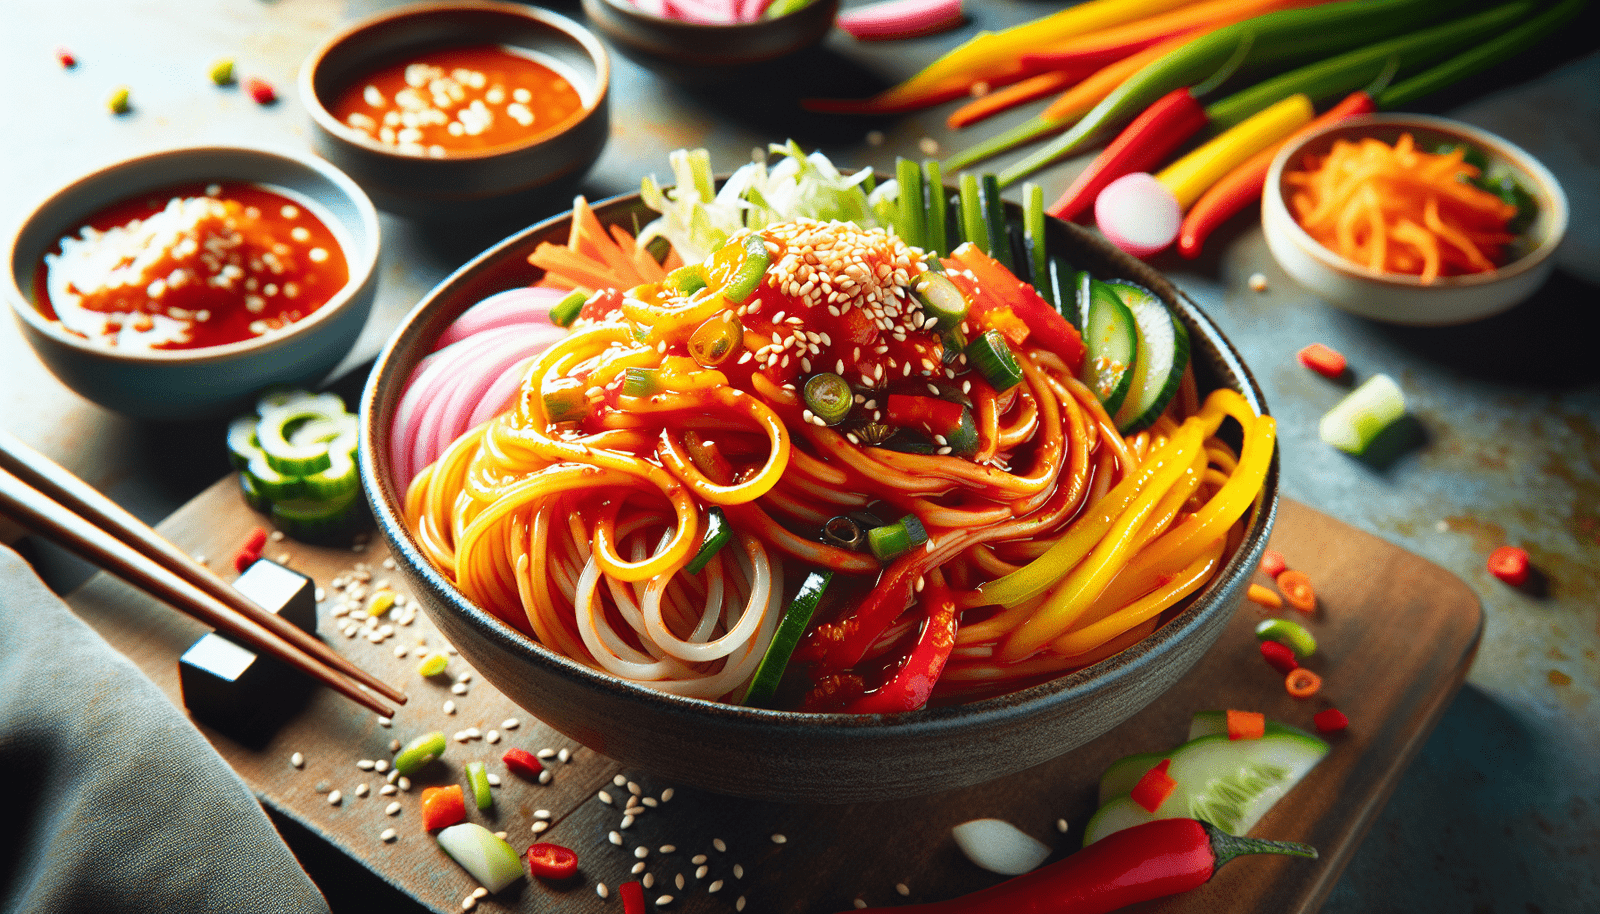 Can You Share Tips For Making The Perfect Bowl Of Traditional Korean Bibim Guksu?